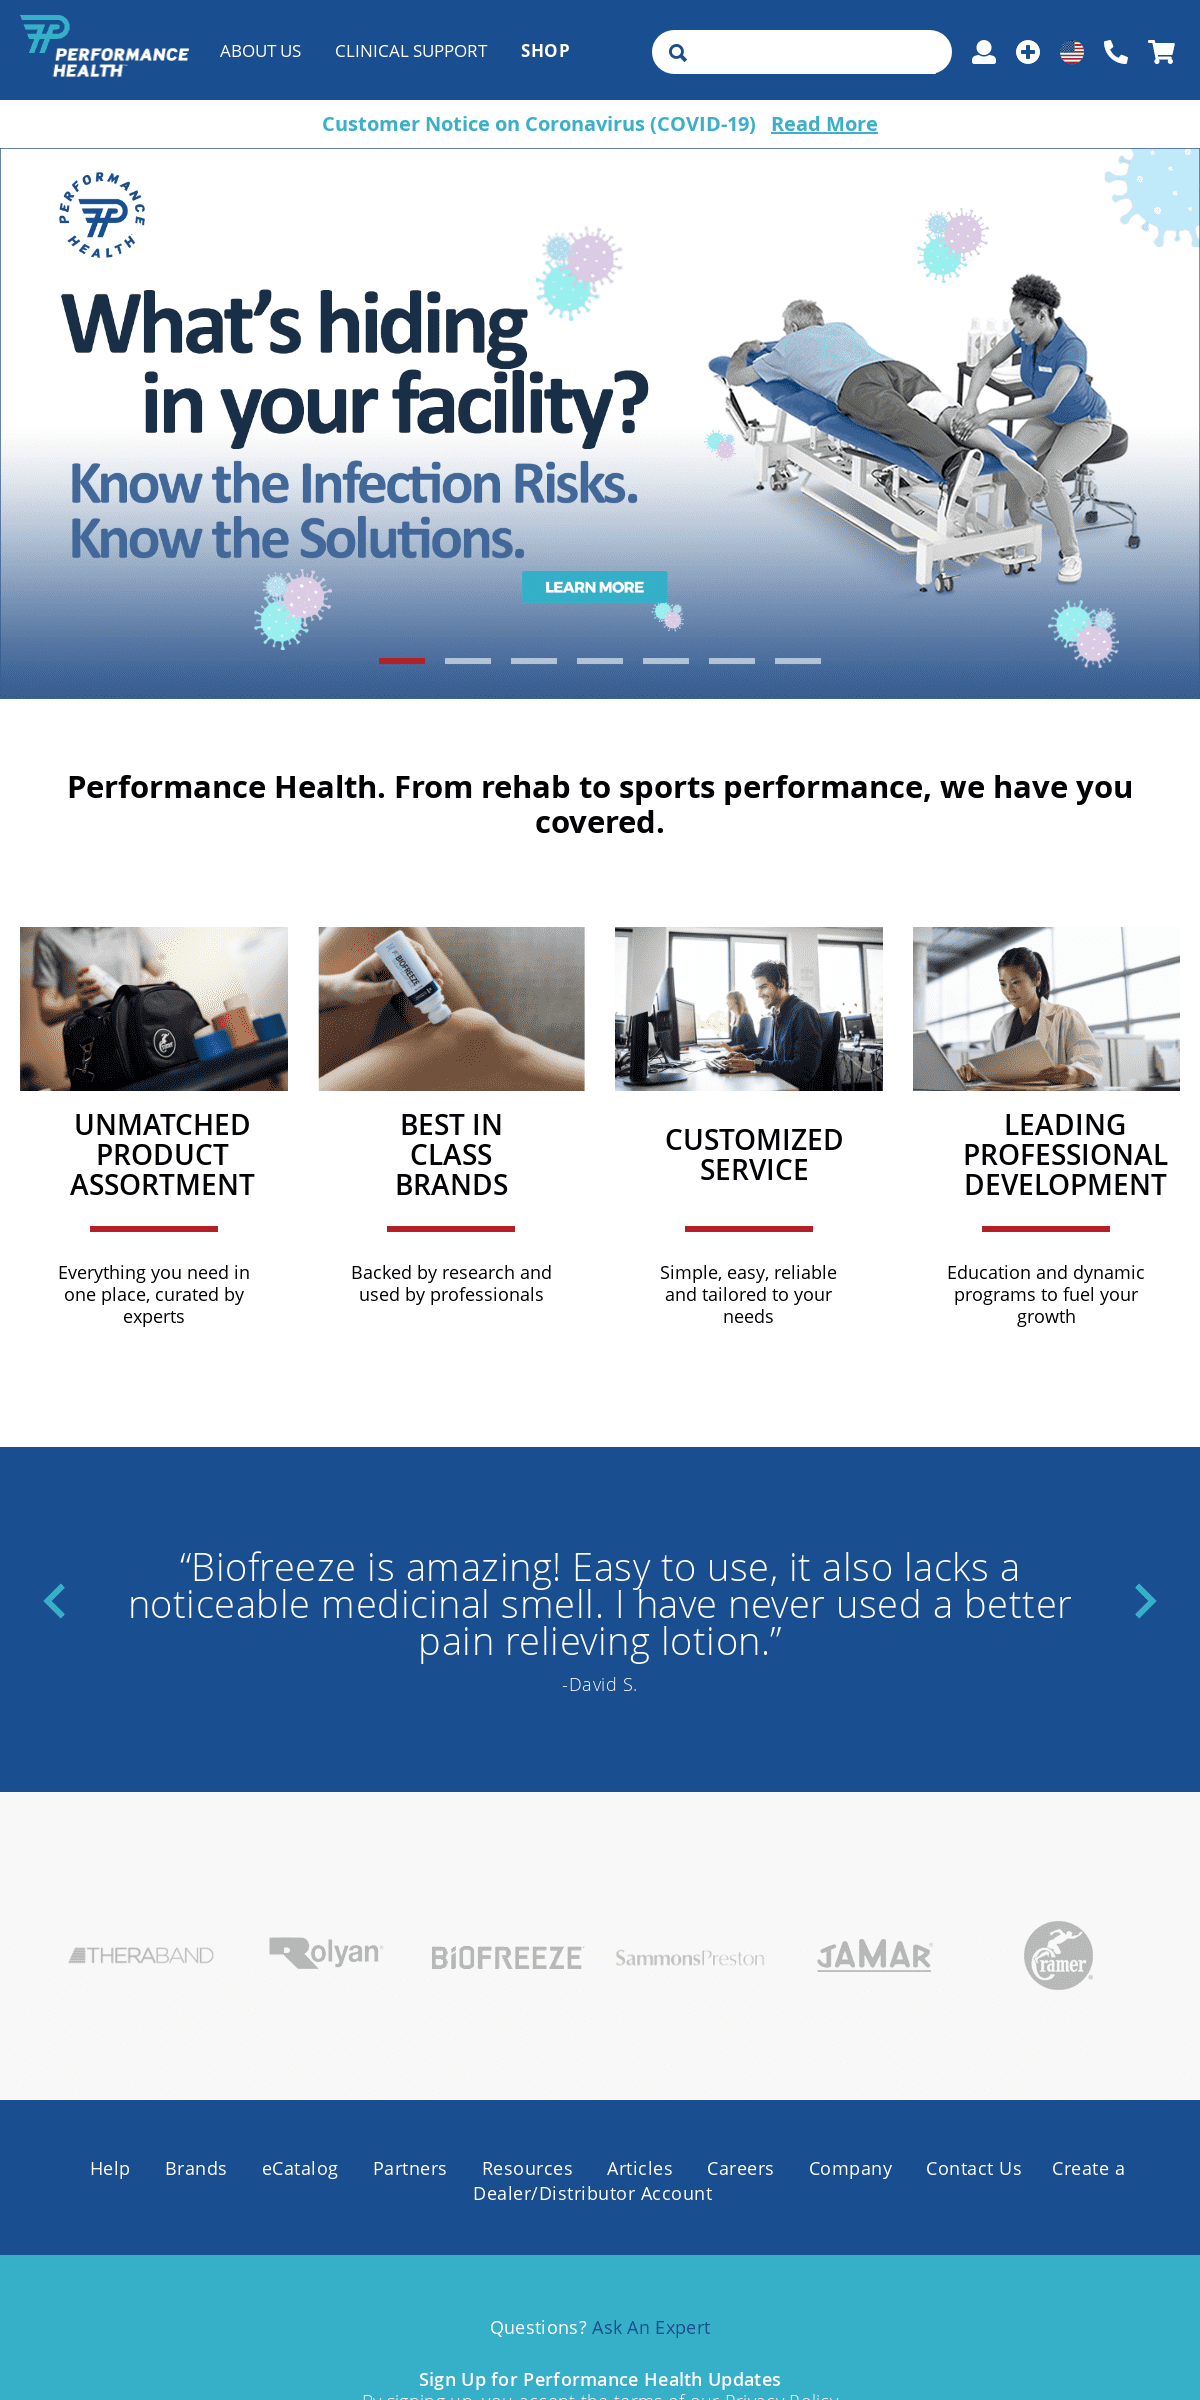 A complete backup of performancehealth.com